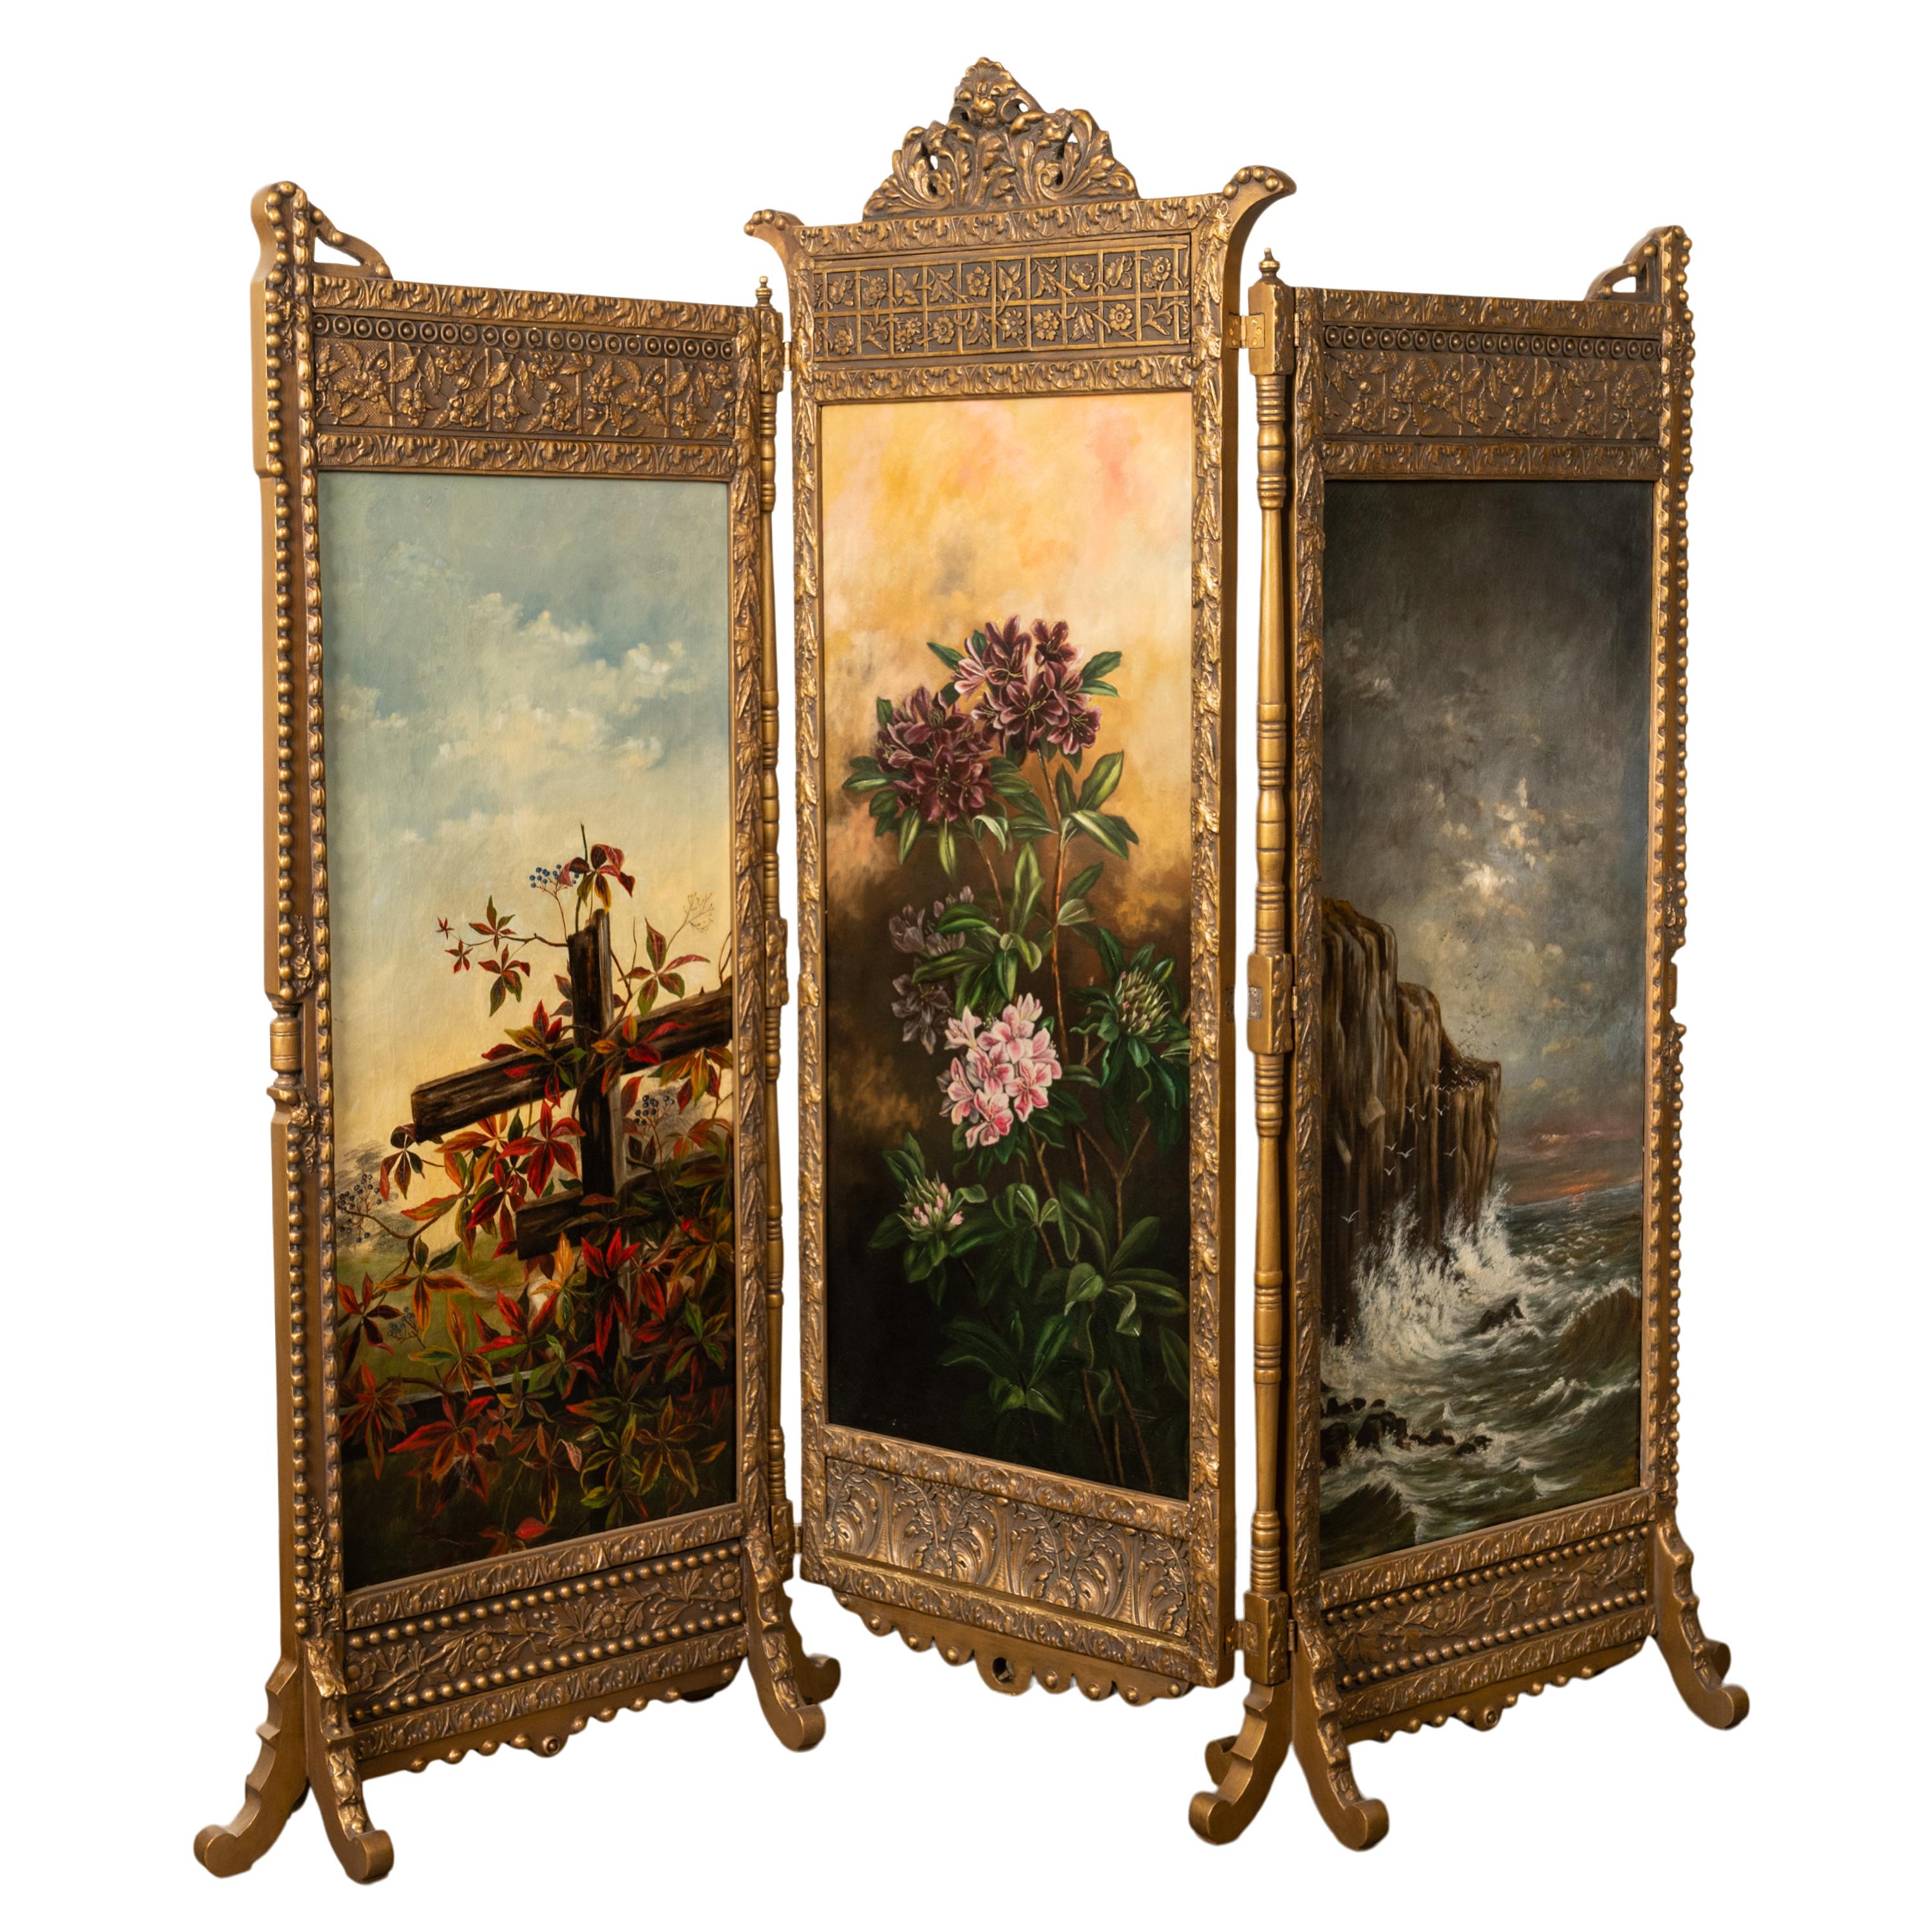 Hand-Painted  Antique Gilded Room Divider Screen Oil Painting Aesthetic Movement NY 1885 For Sale